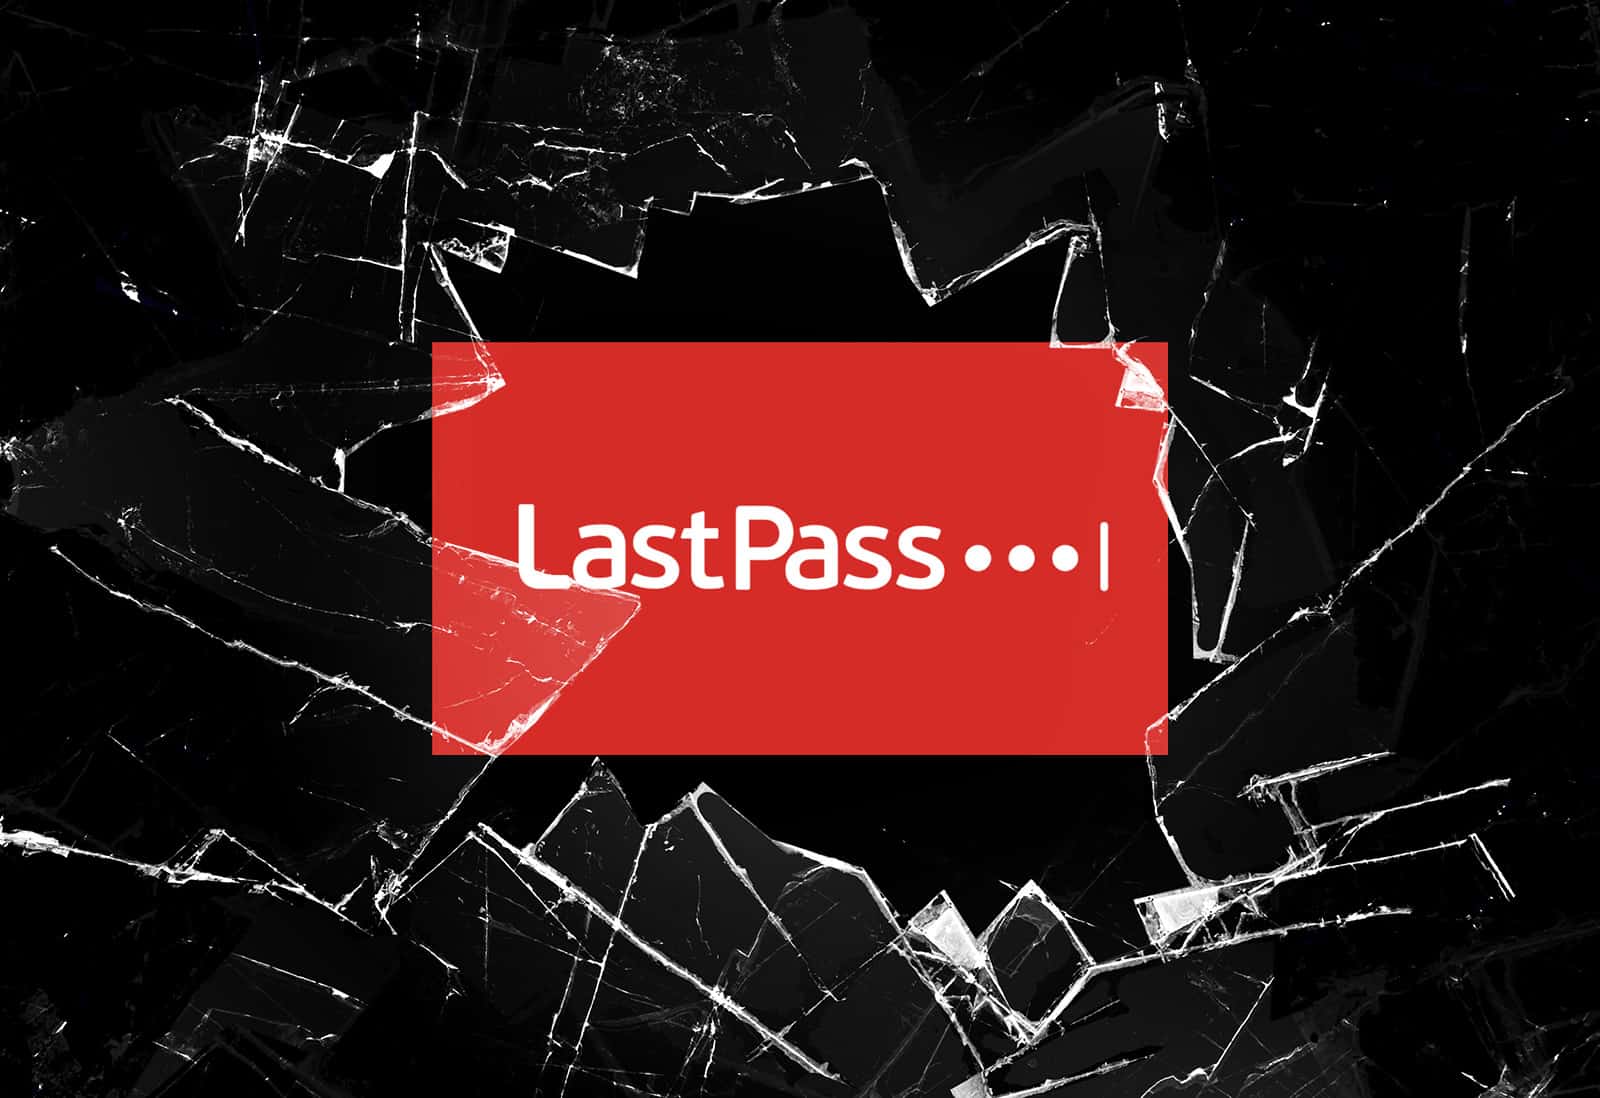 LastPass Breach Causes Theft of $53K Bitcoin According to Lawsuit